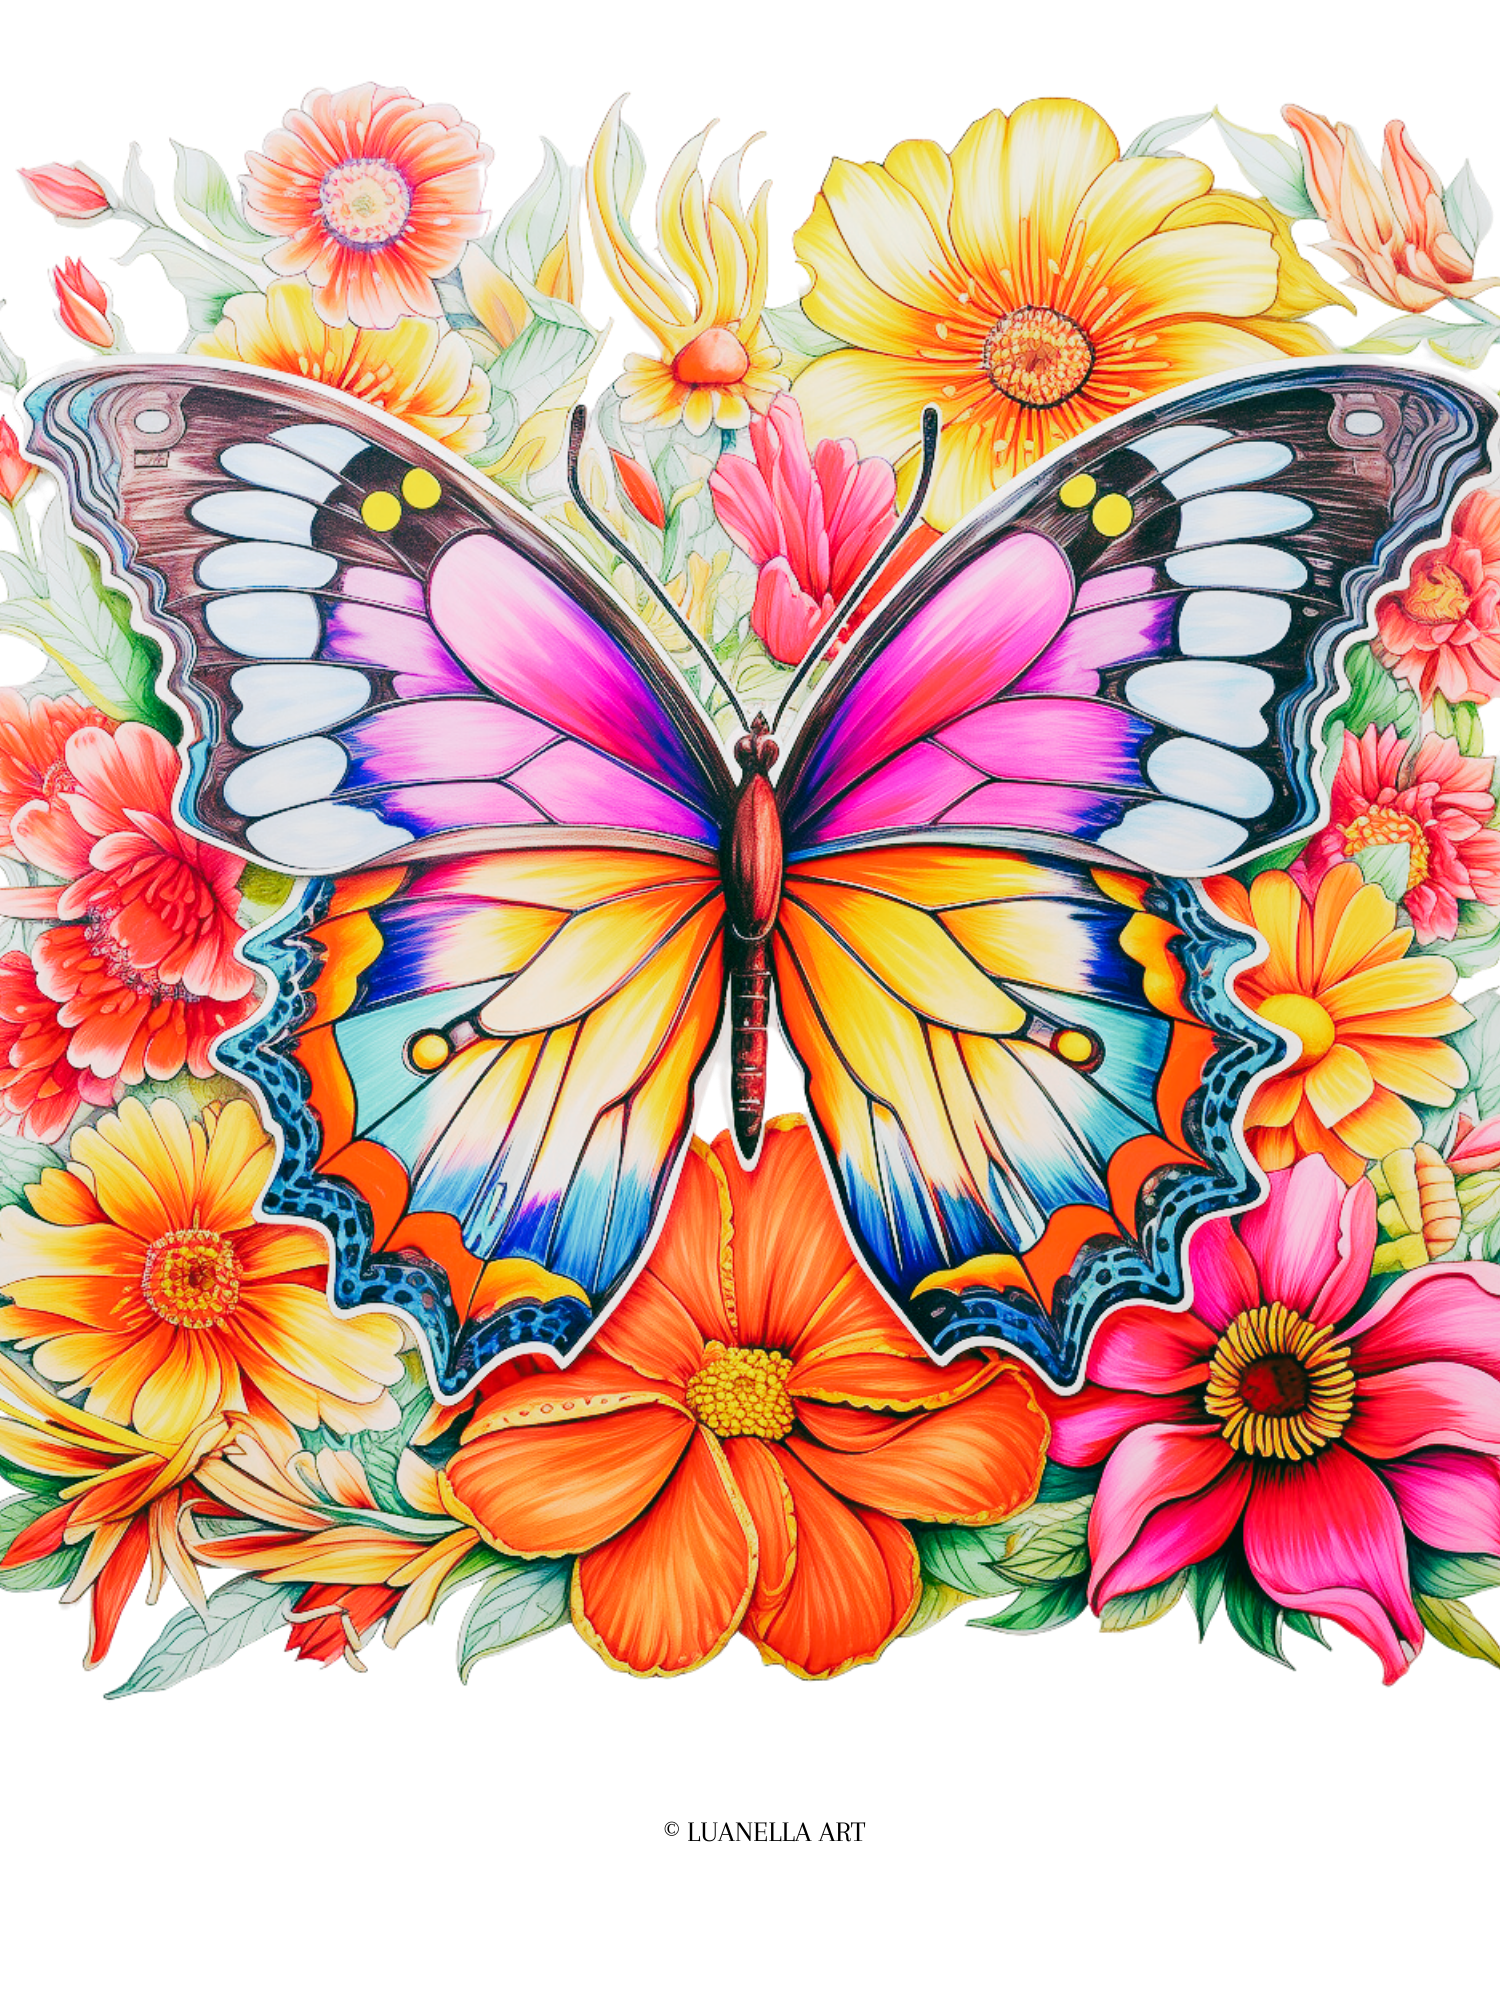 Butterfly with flowers background | Art Print | Instant Digital Downlo –  Luanella Art